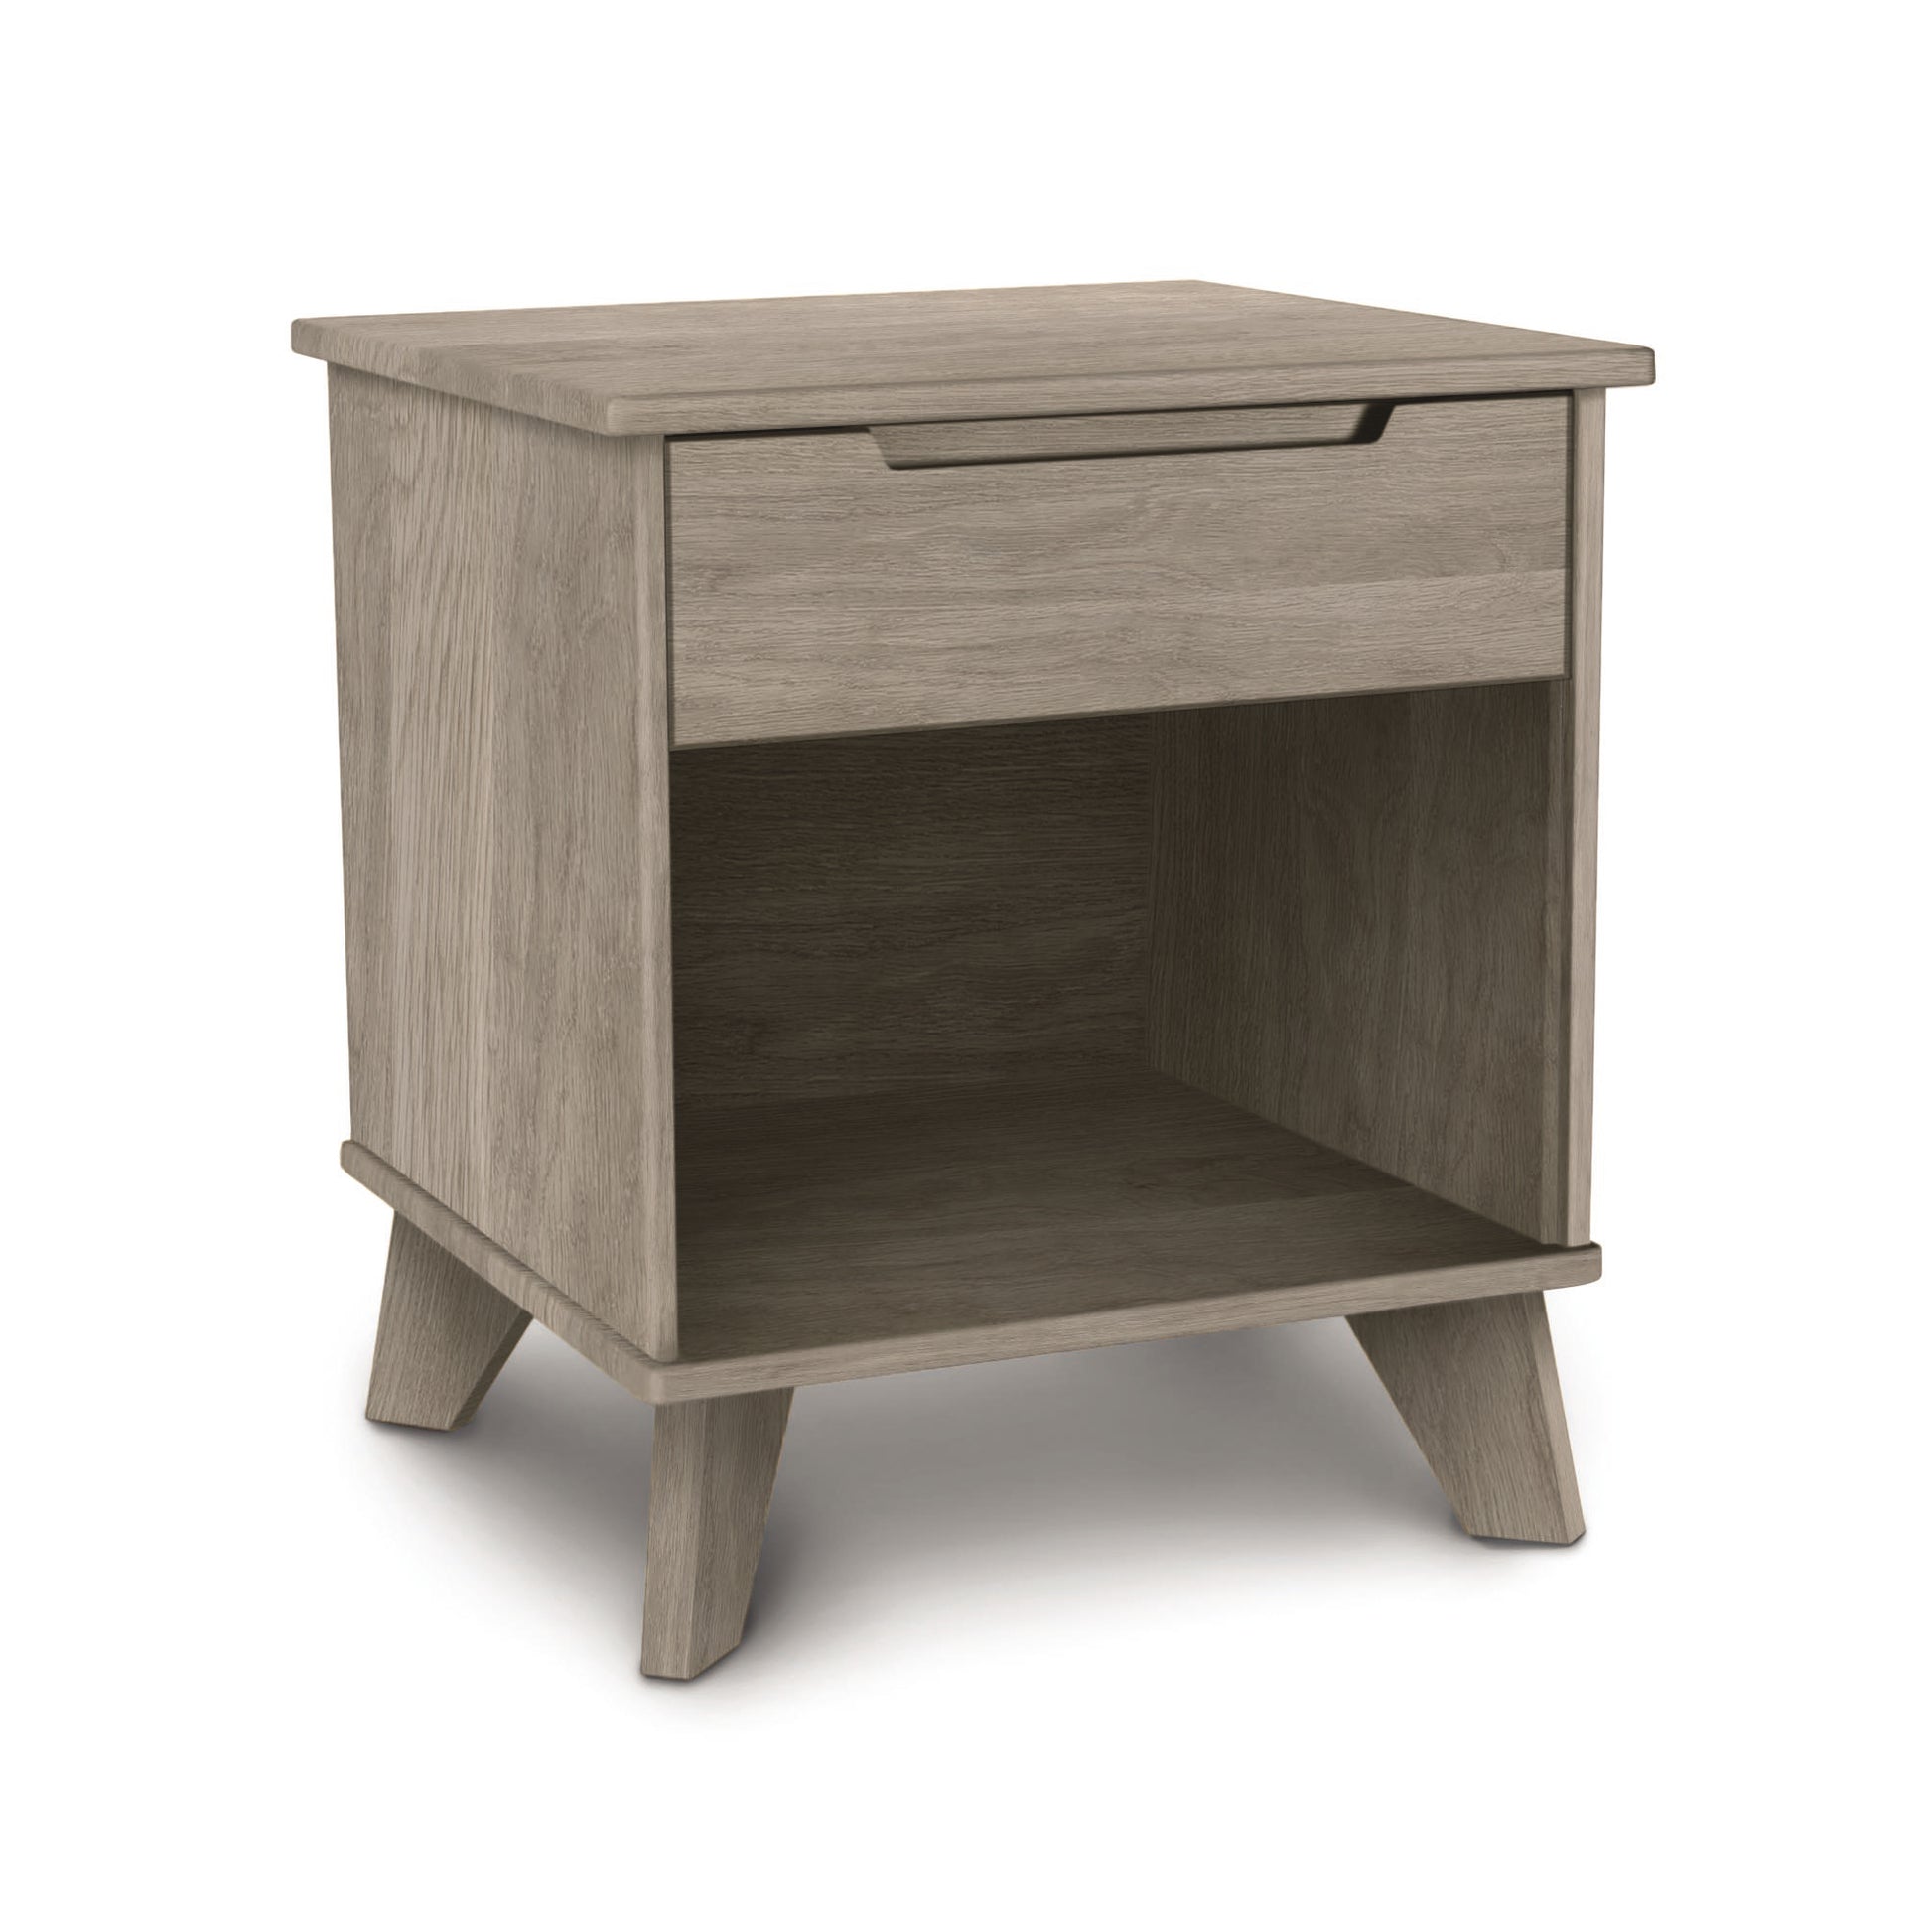 A modern Copeland Furniture Linn 1-Drawer Enclosed Shelf Nightstand made from sustainable solid wood with a single drawer and an open shelf, featuring low emissions finishes, isolated on a white background.